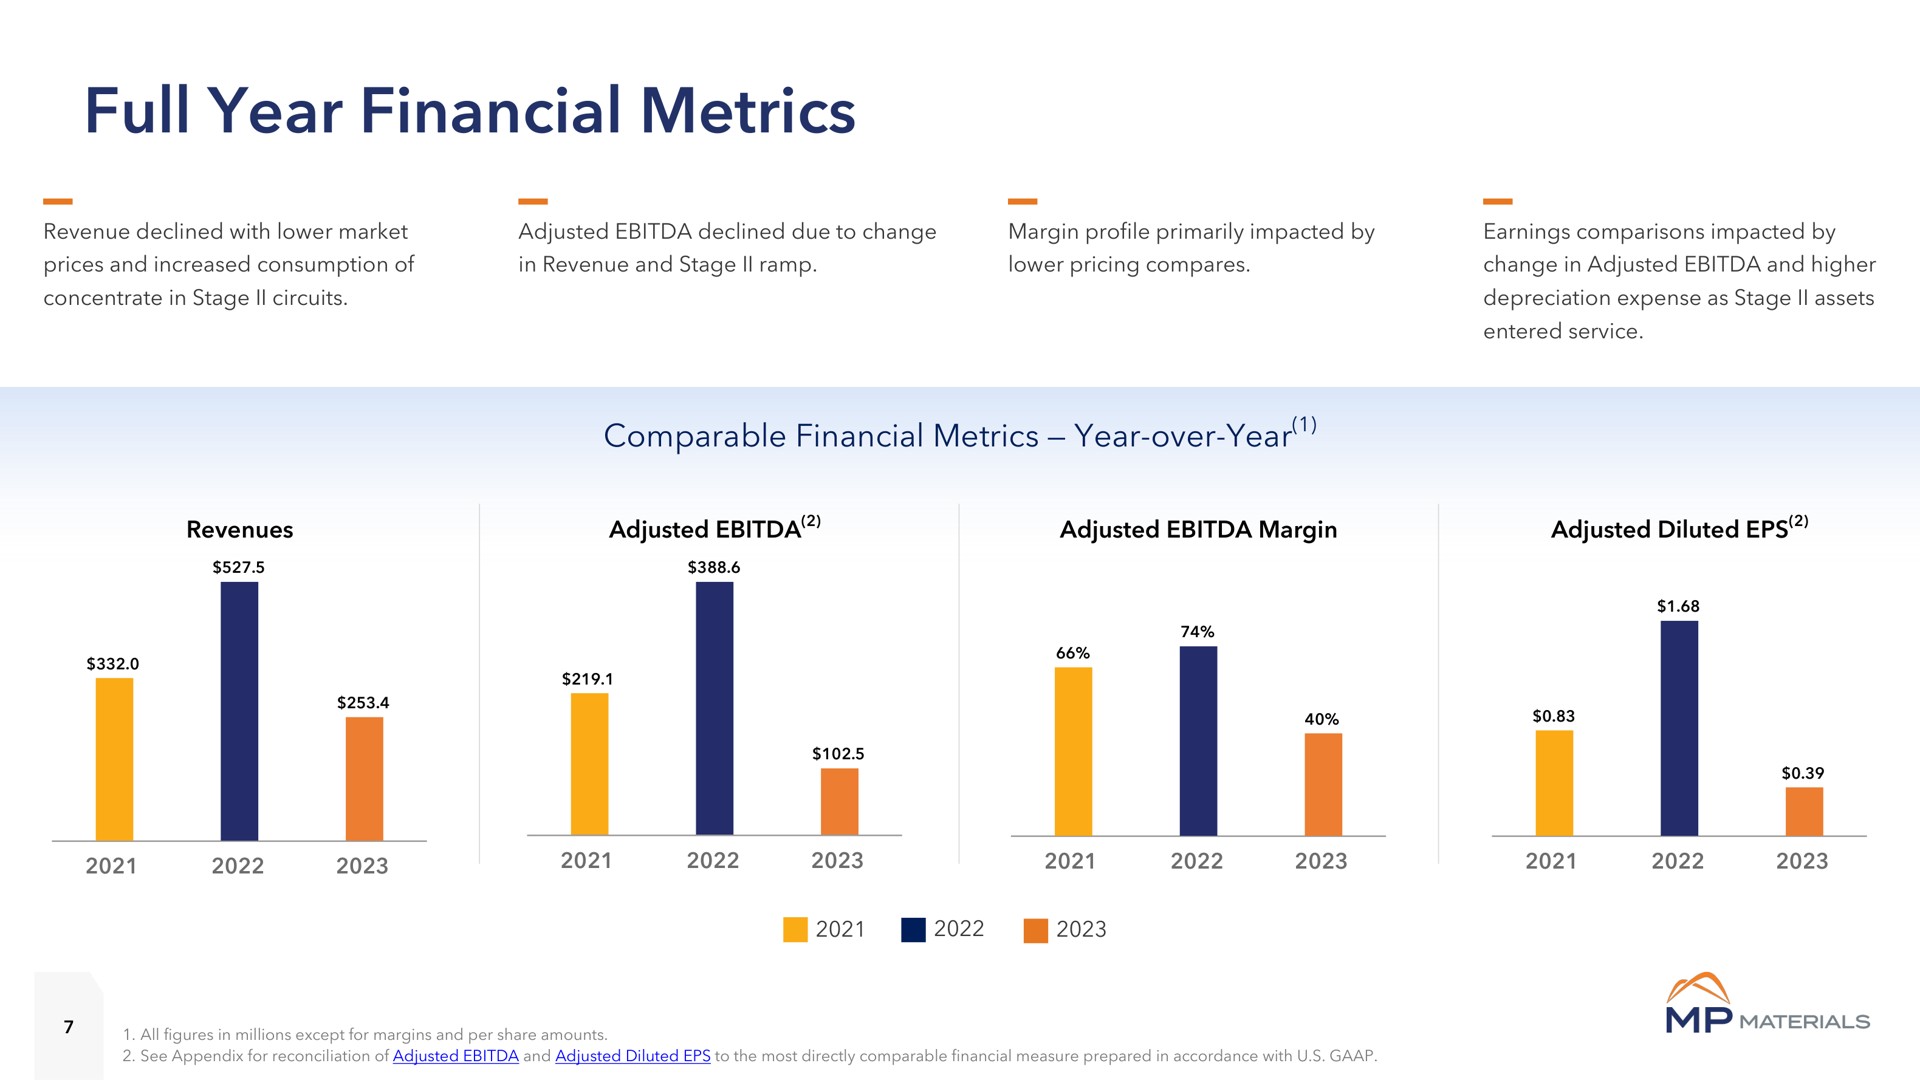 full year financial metrics comparable year over year | MP Materials